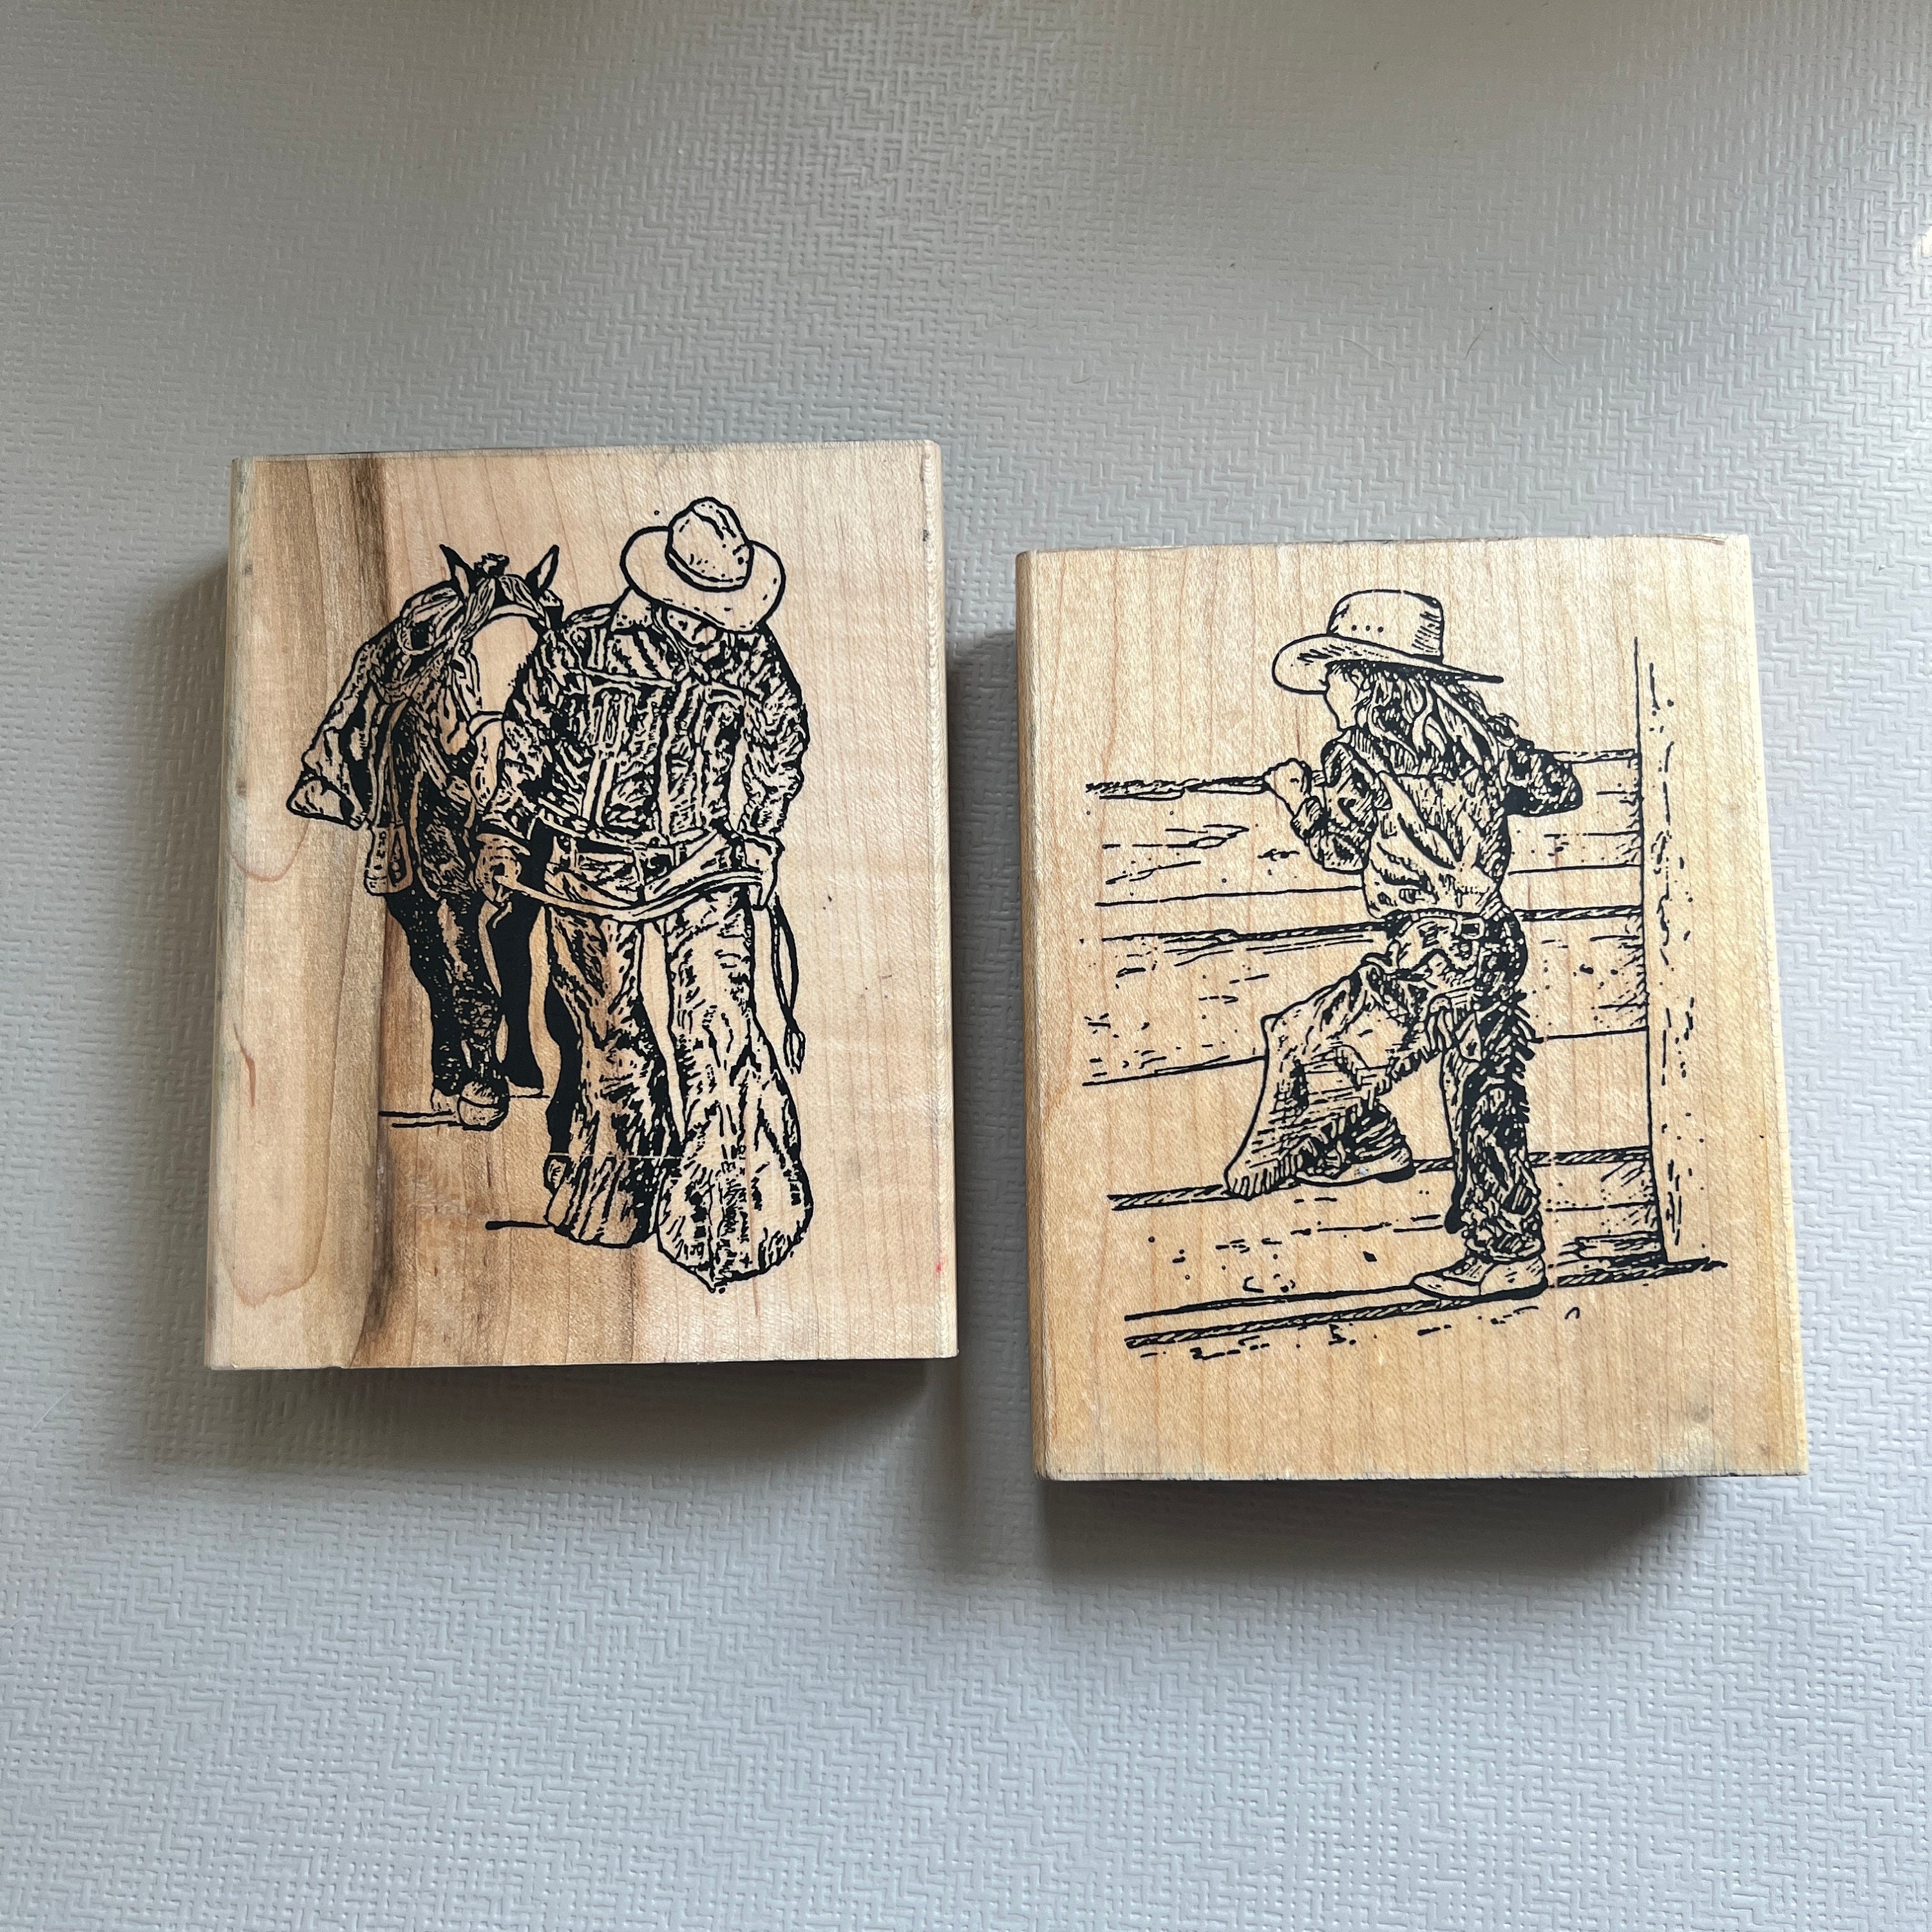 Set 1x1 Inch Rubber Stamps, FARM Stamp, Wooden Block Rubber Stamp